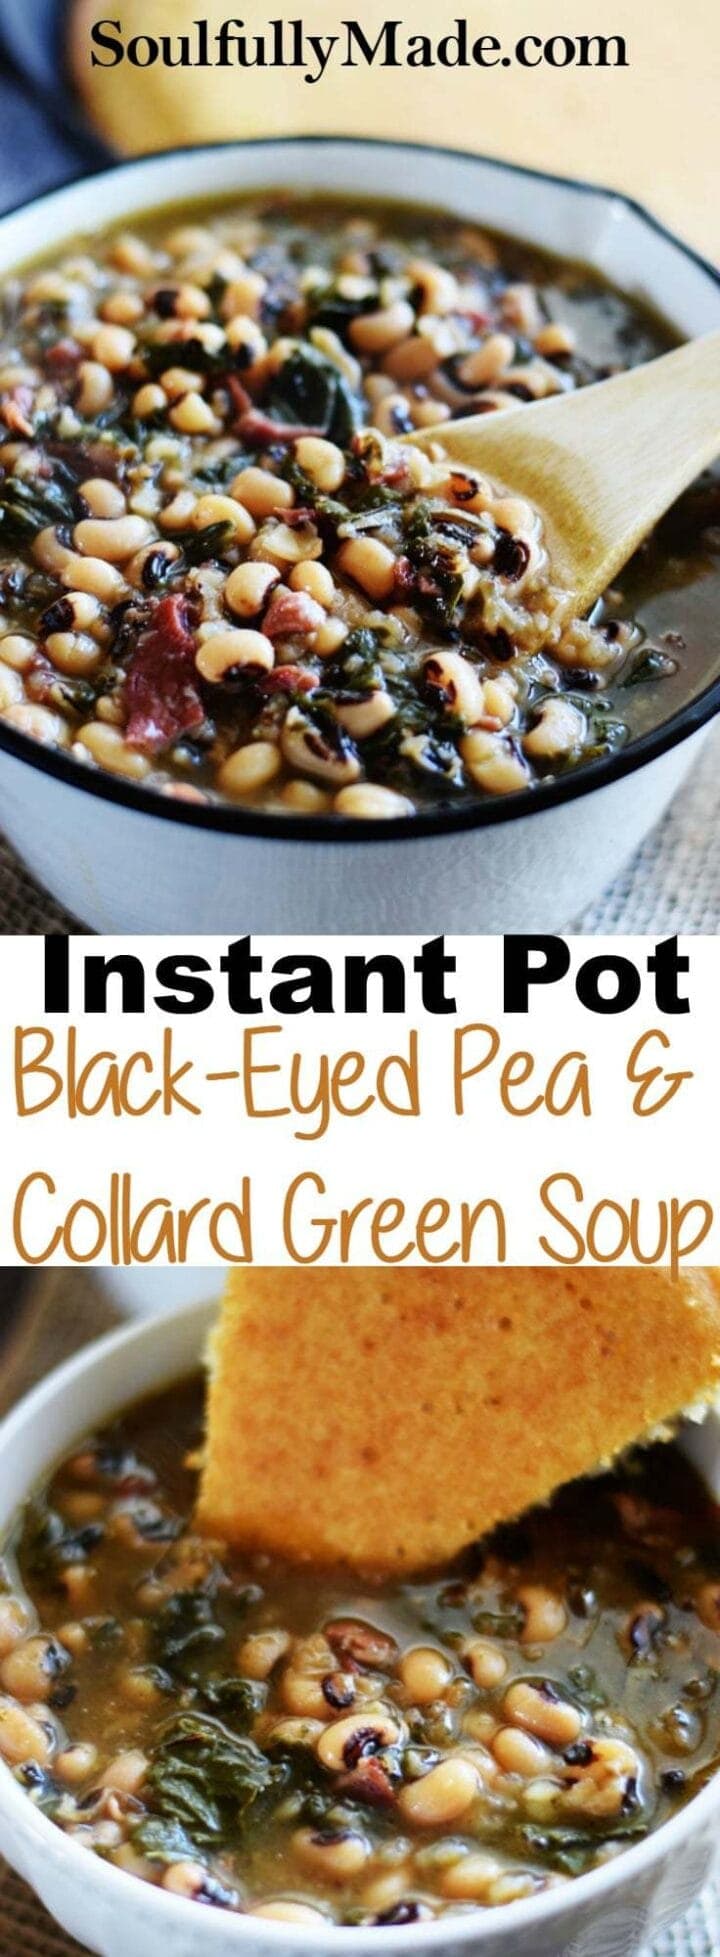 Instant Pot Black-Eyed Pea and Collard Green Soup - Soulfully Made